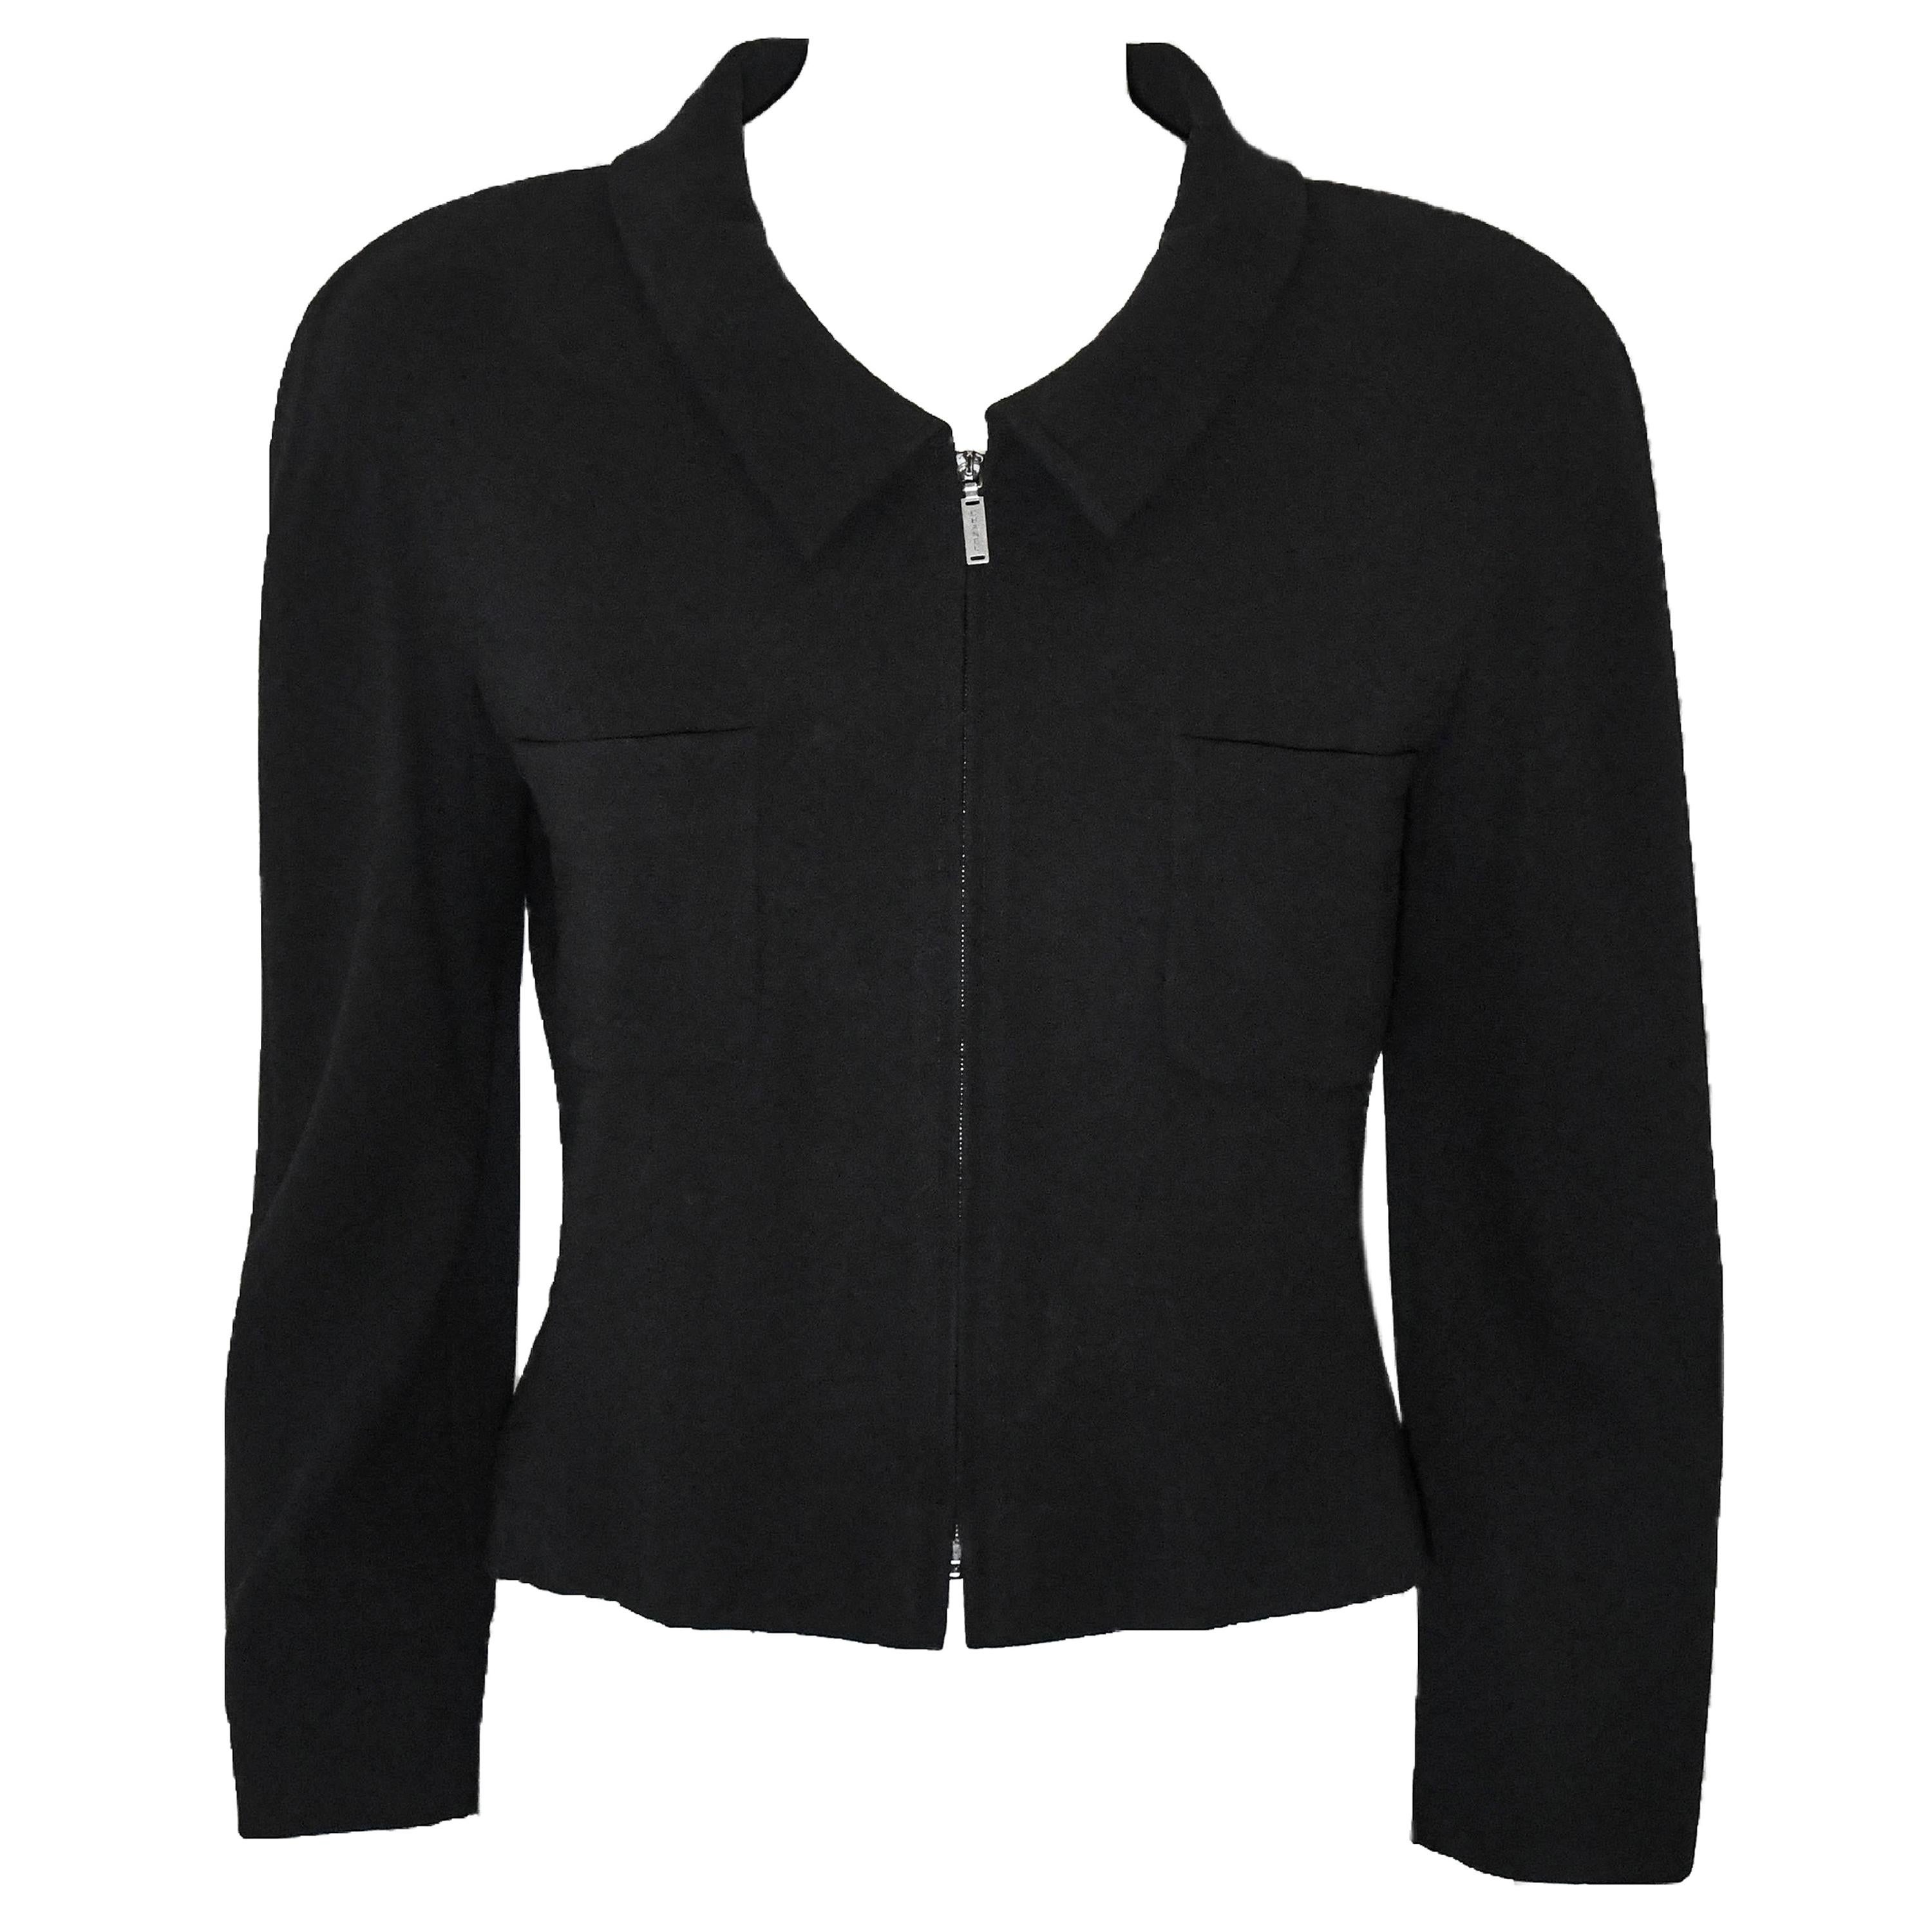 Chanel 21A Black Crop Jacket with Crystal Buttons - FR38 (4/6) – I MISS YOU  VINTAGE